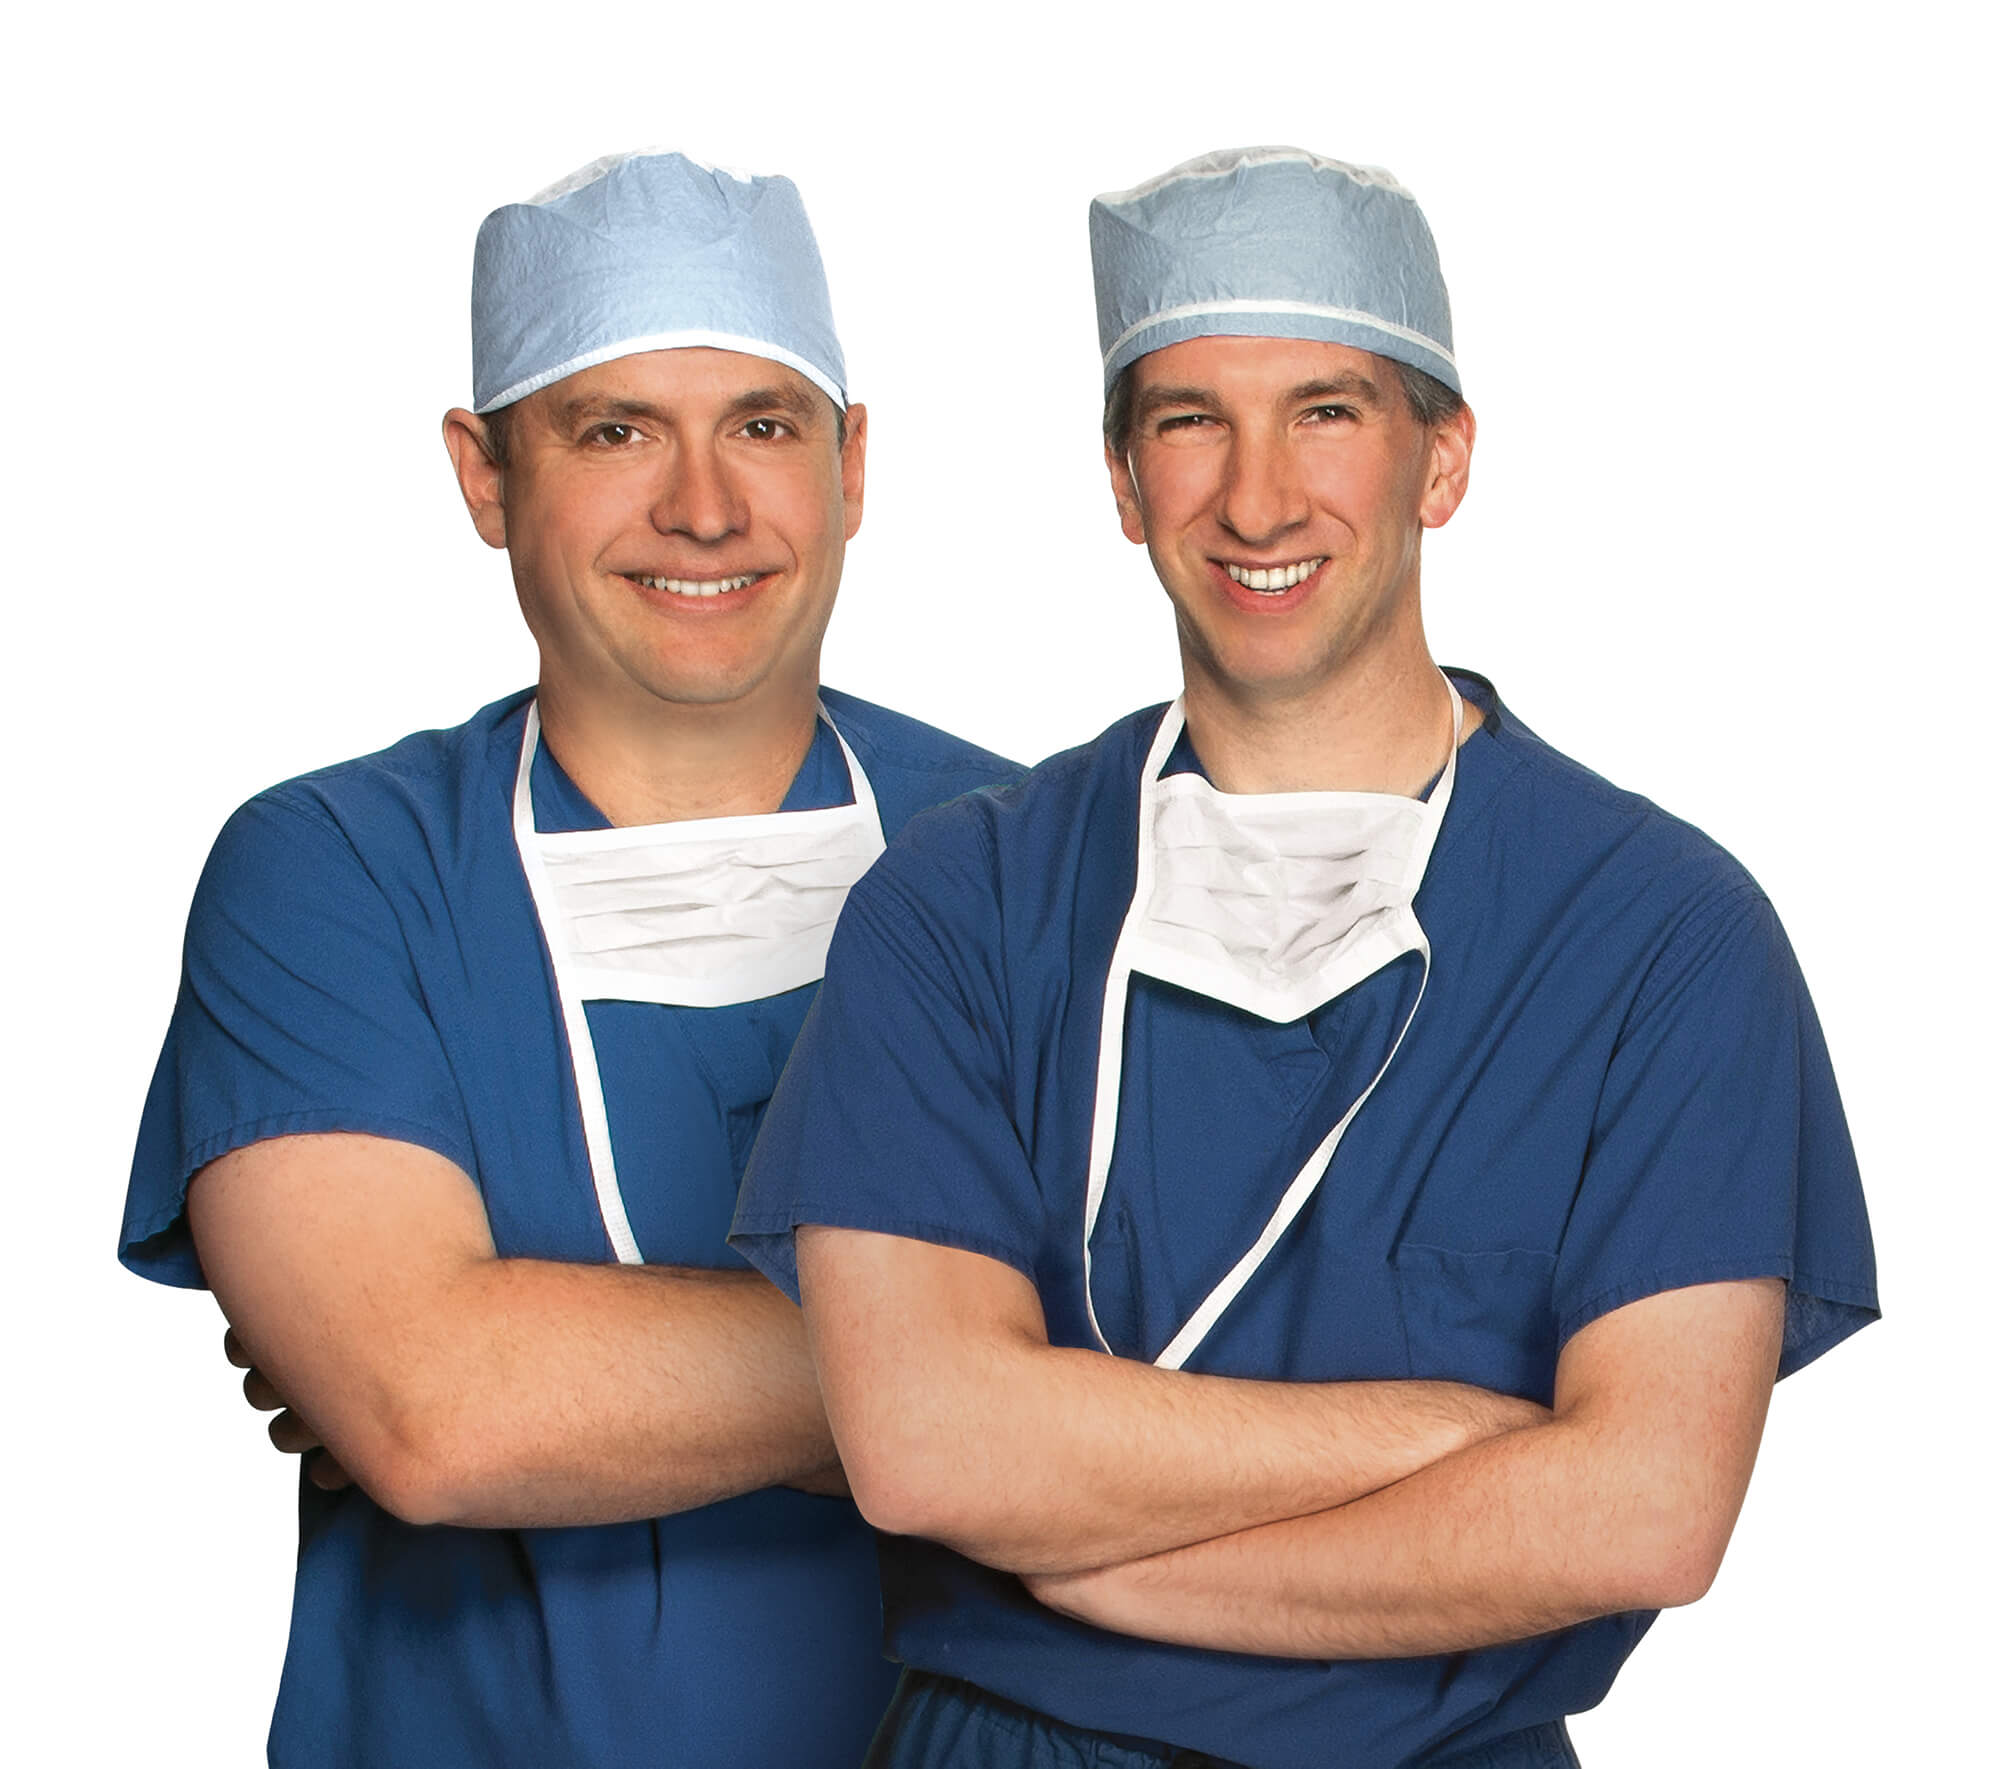 Dr. Adam Altman, MD and Dr. Jonathan Primack, MD are the LASIK experts at Eye Consultants of PA. They are ophthalmic surgeons who perform laser eye surgery, PRK surgery, cornea surgery and cataract surgery.